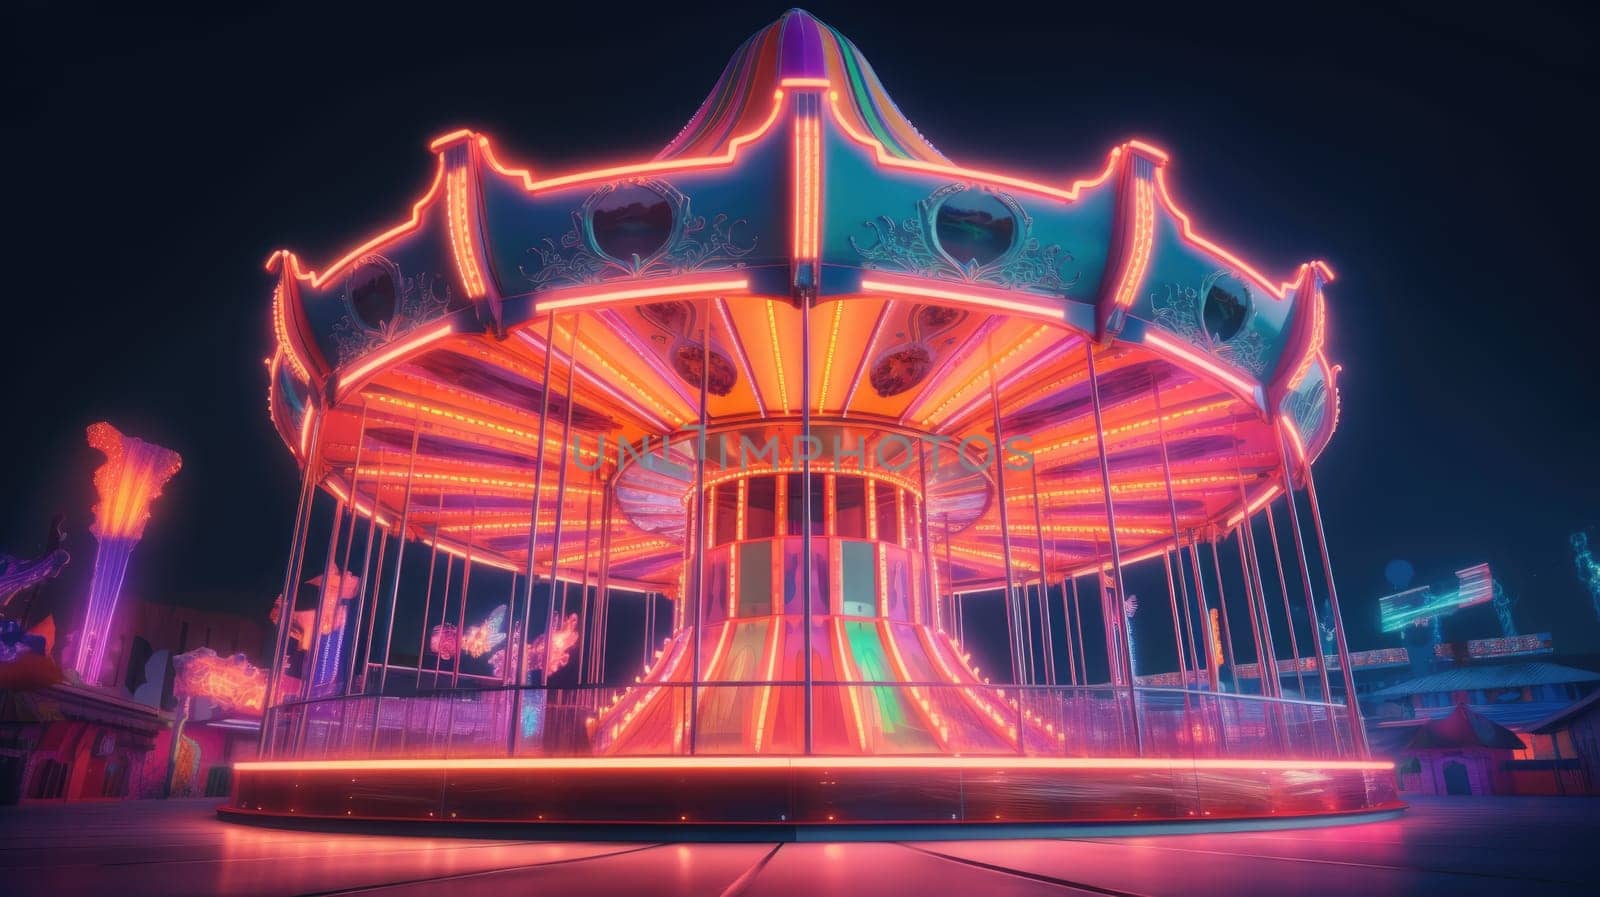 Amusement park carousel at night with bright colorful neon lights by JuliaDorian